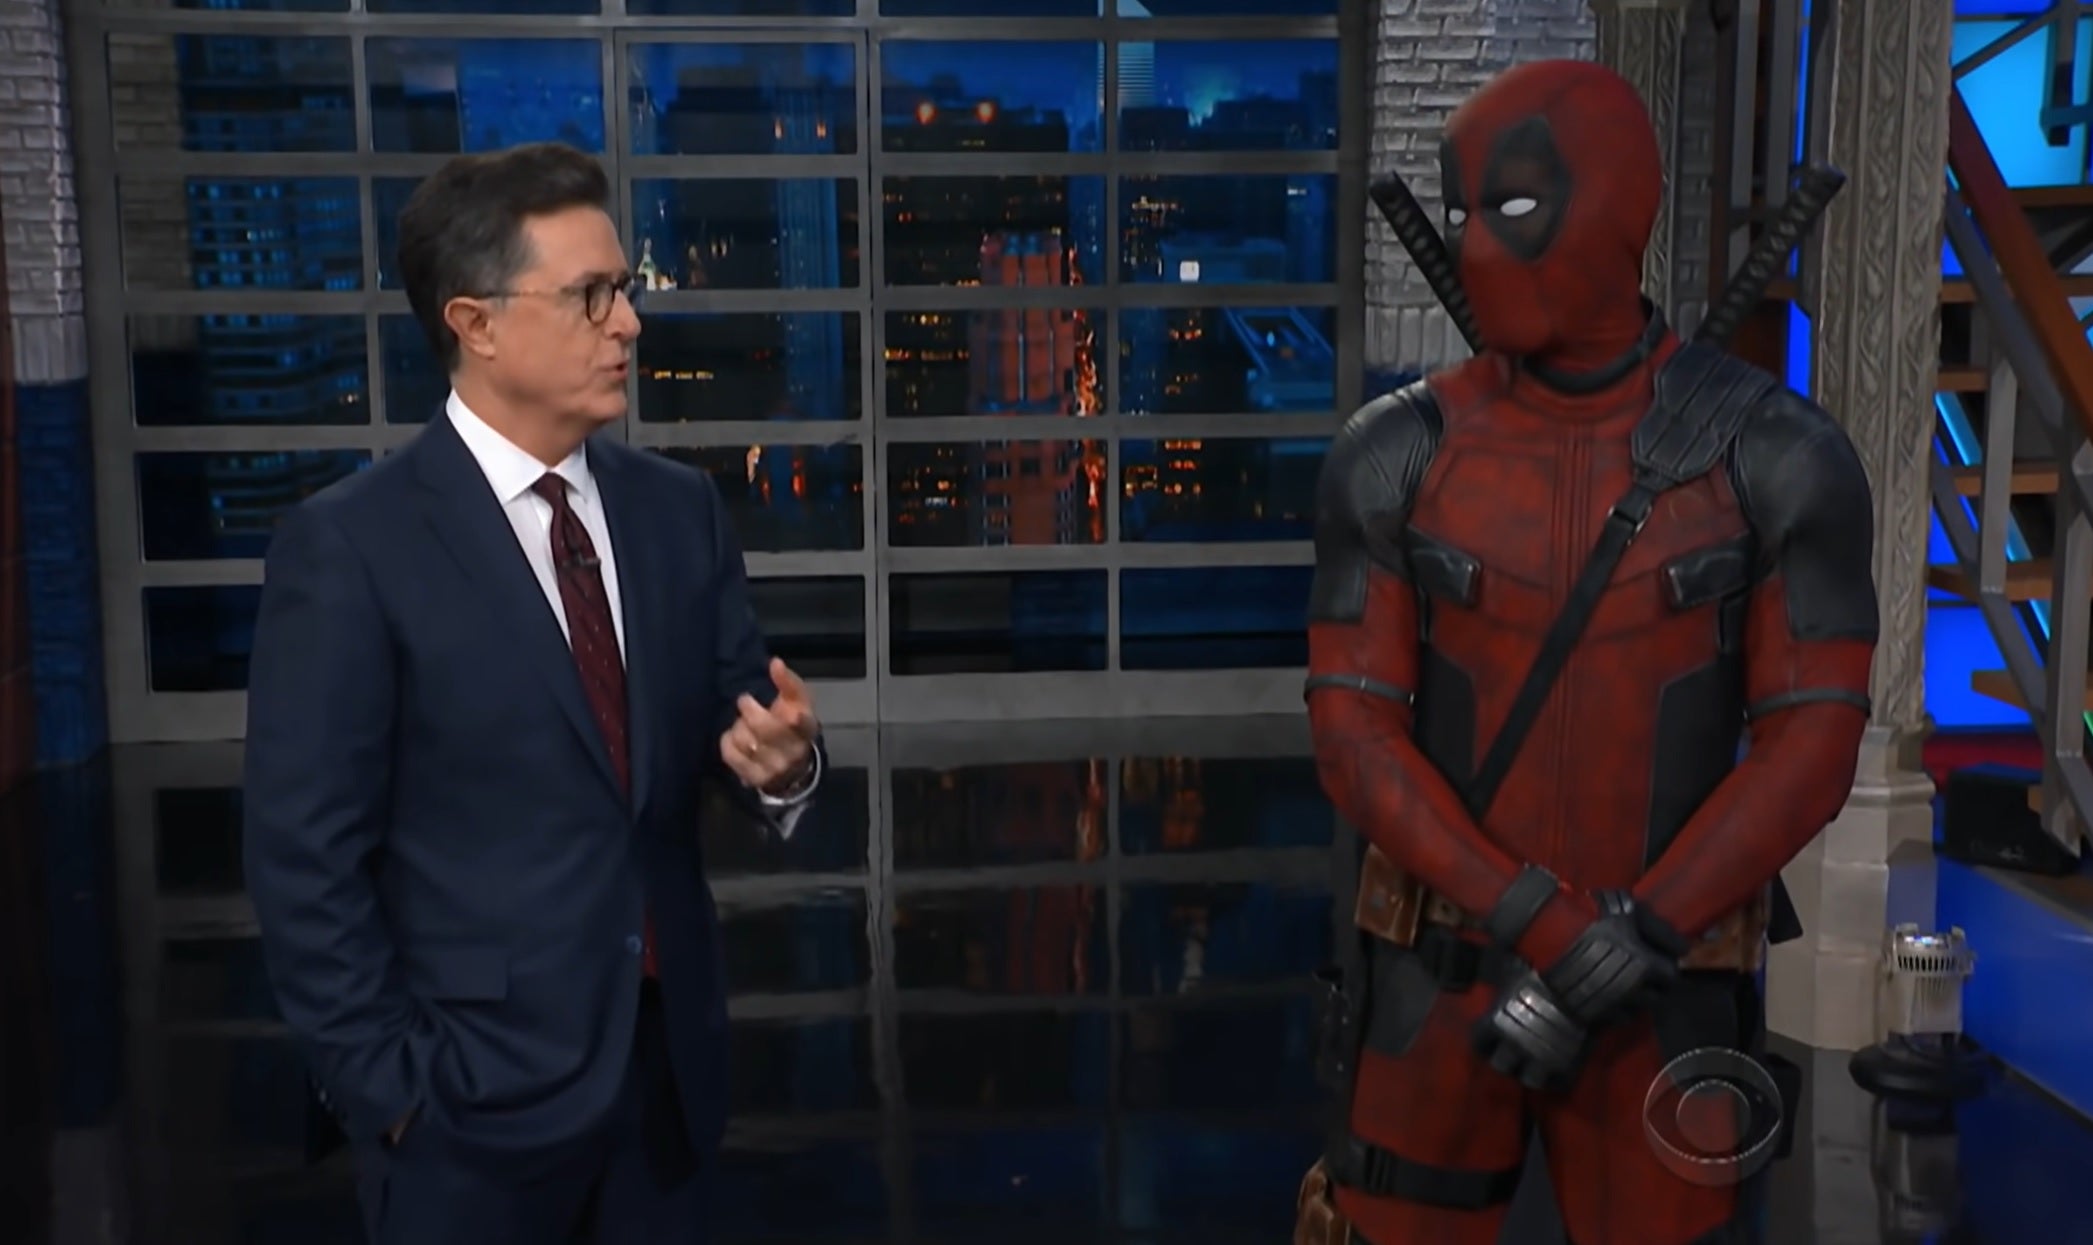 Ryan Reynolds shows up as Deadpool for the Late Show with Stephen Colbert